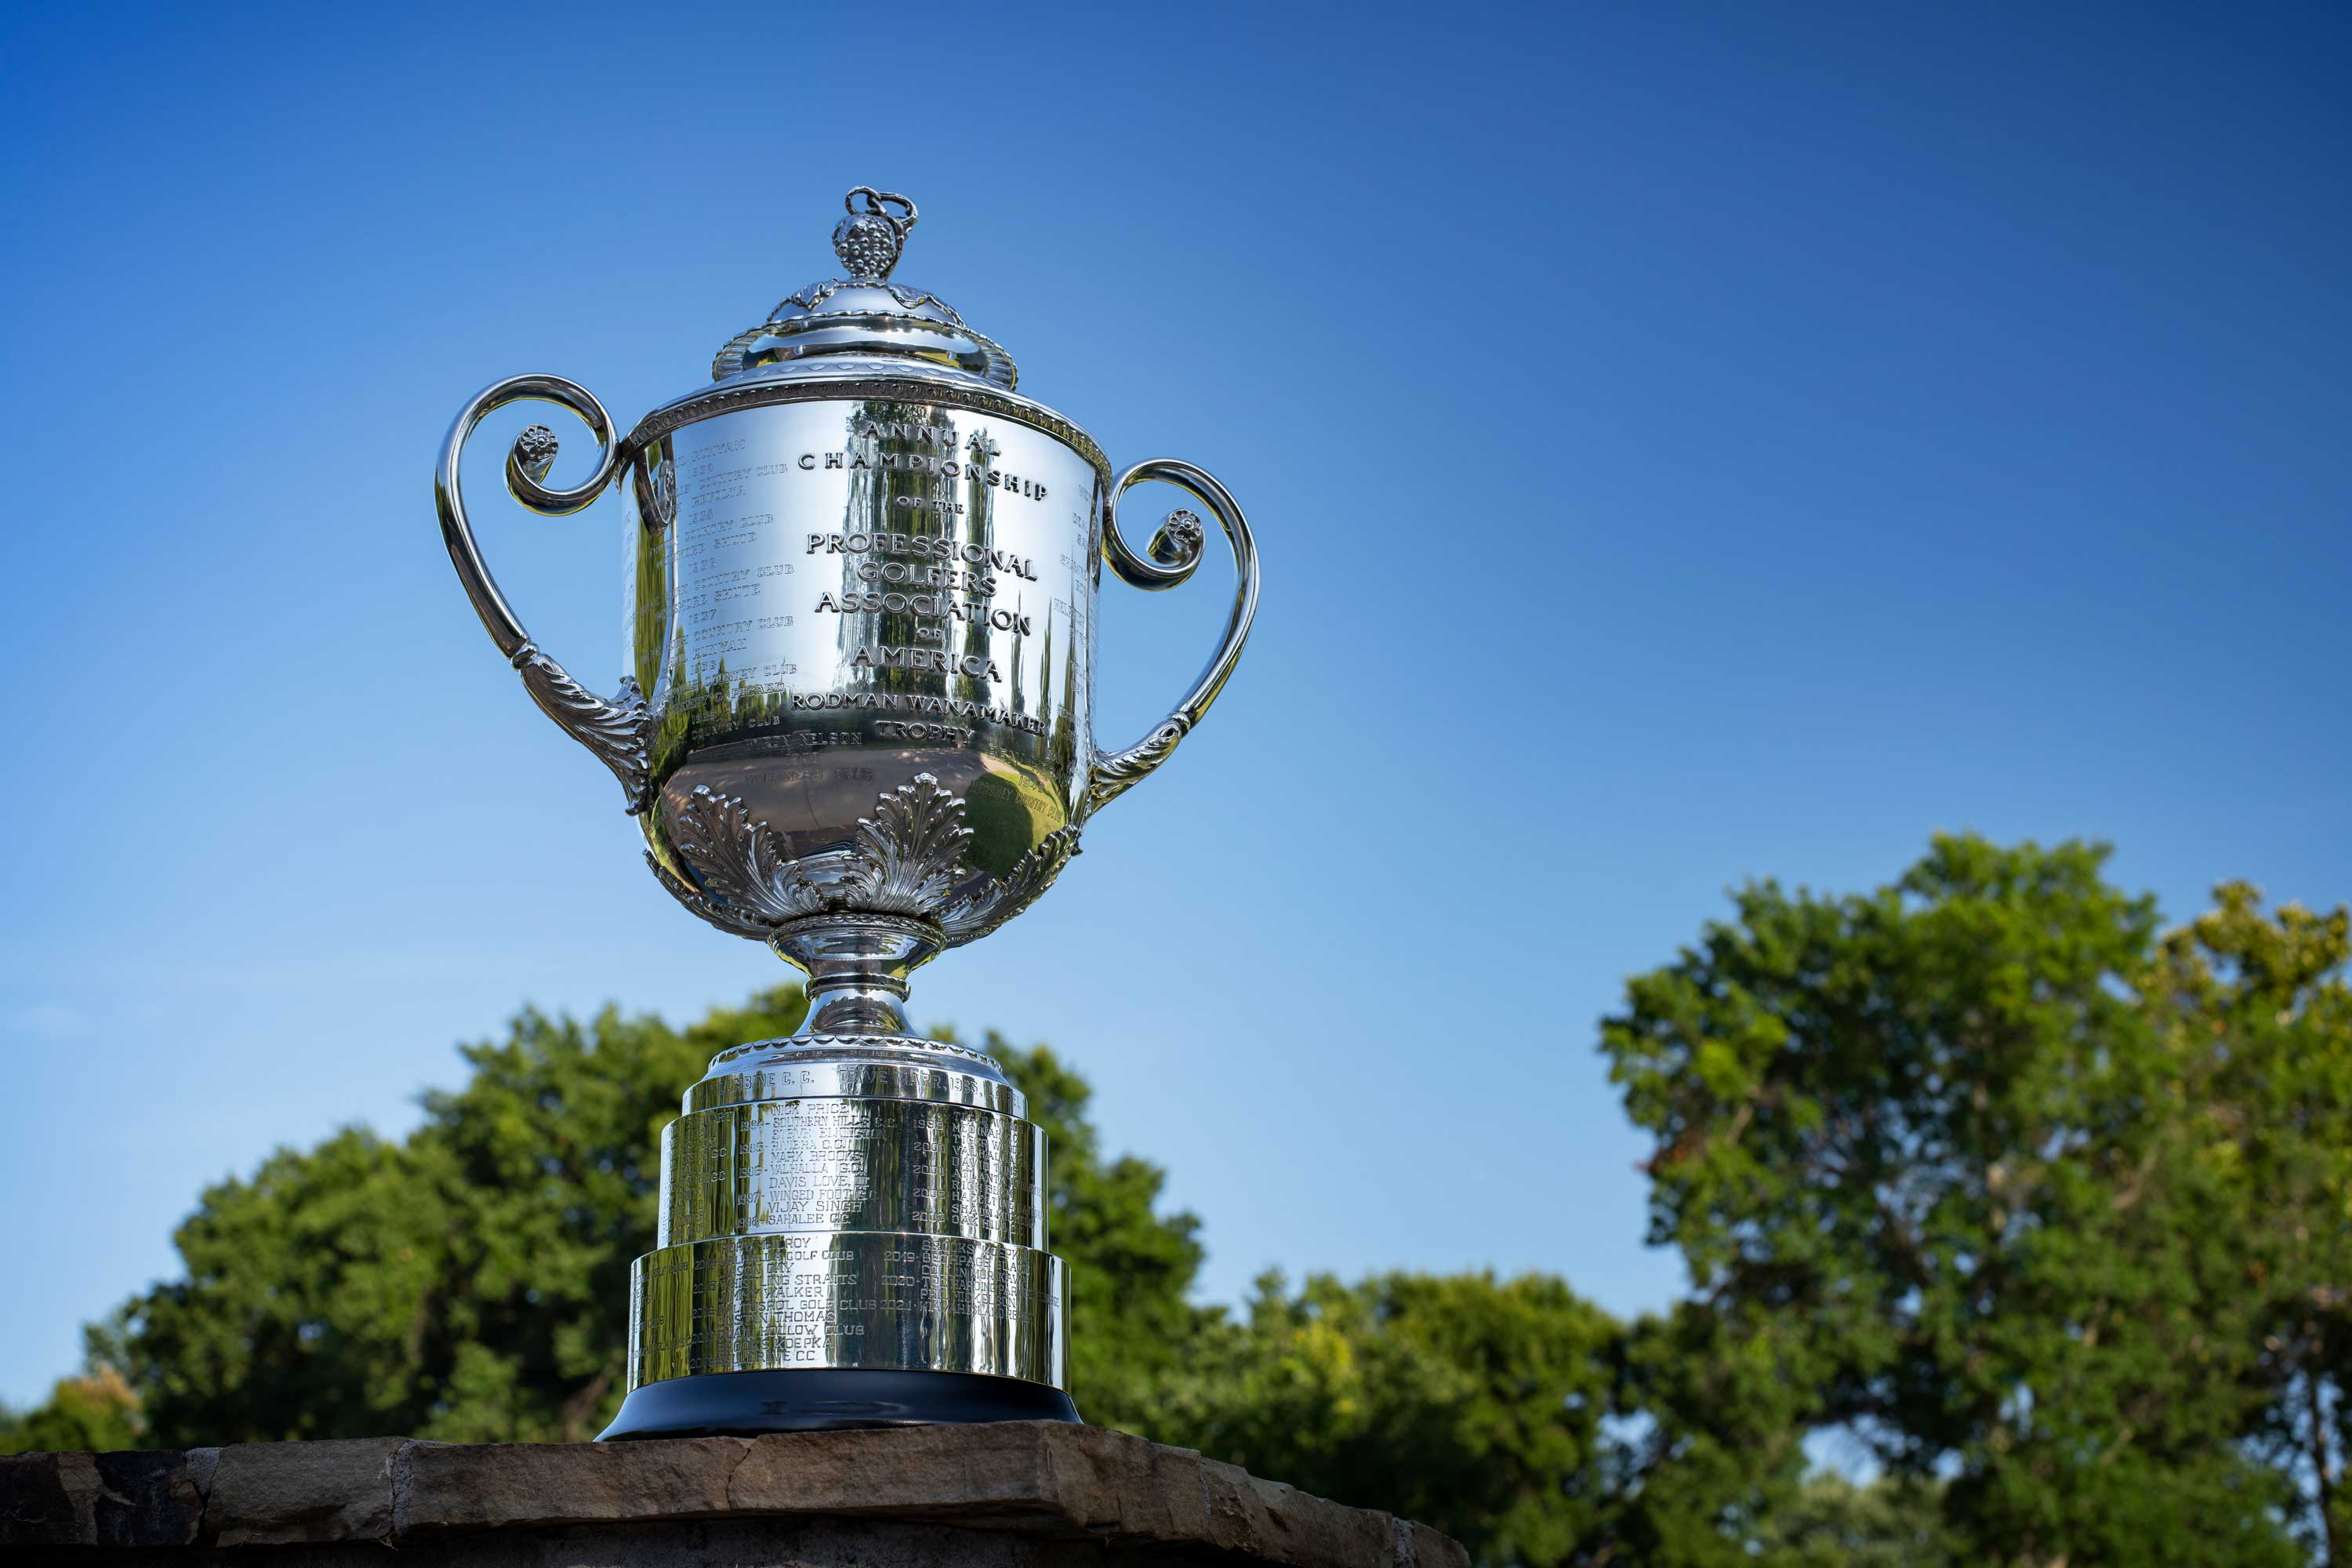 PGA Championship Cut: What are the rules and what are some